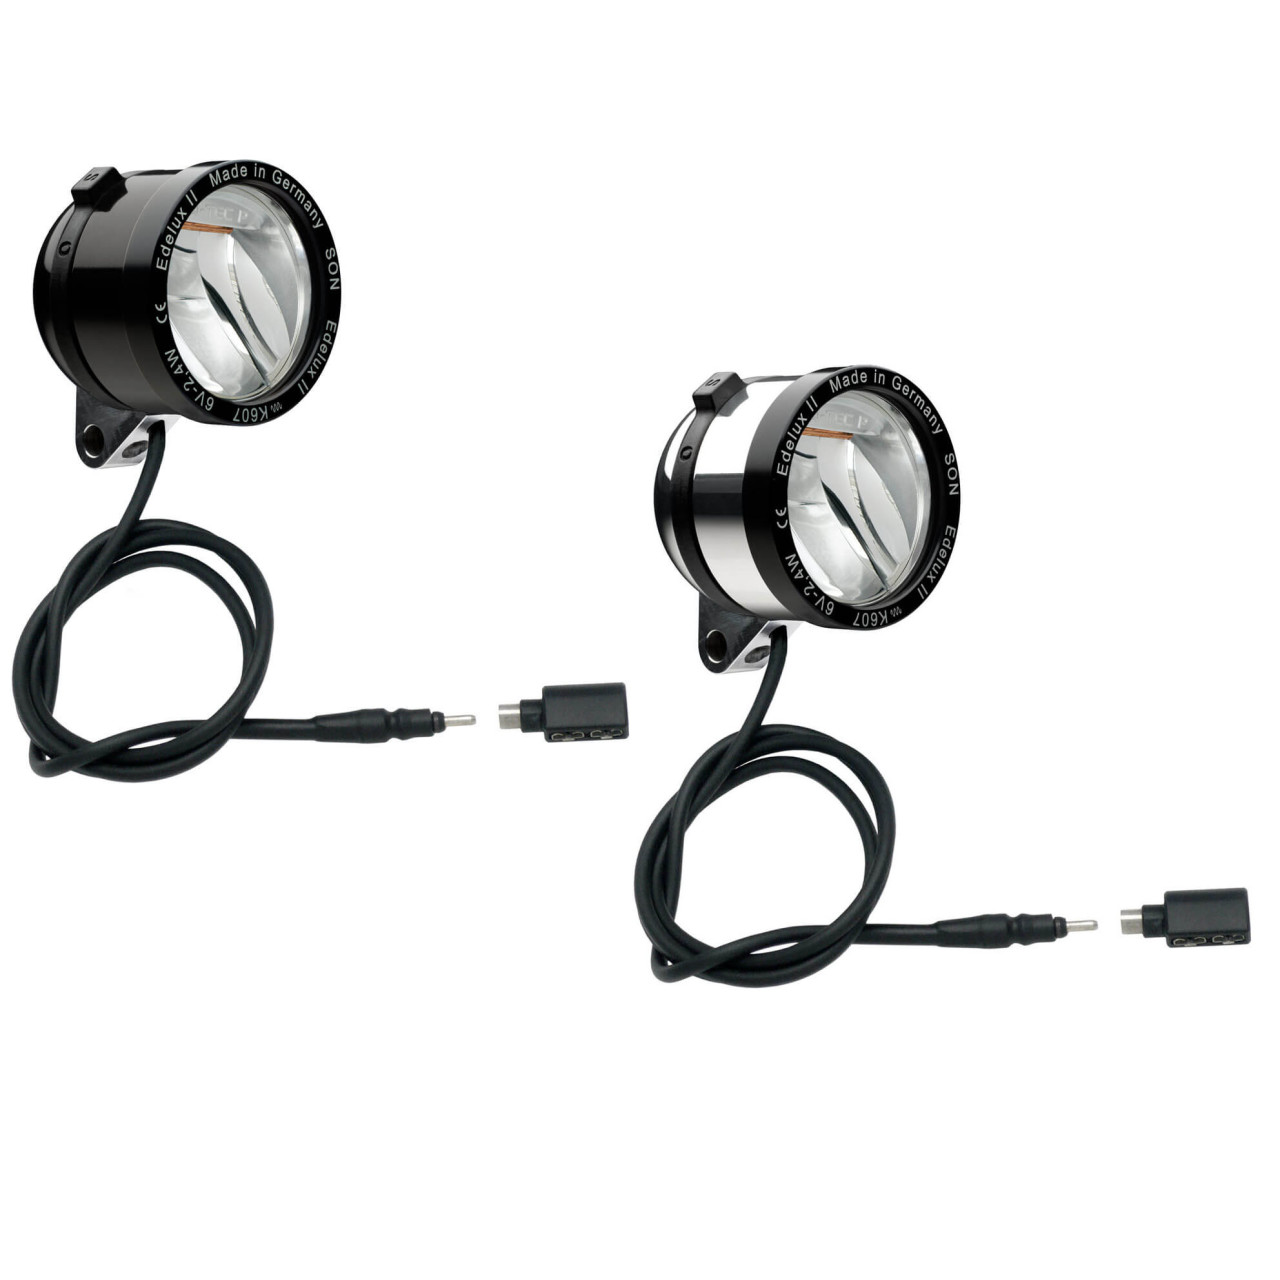 SON - Edelux II Headlight with Coaxial Connector and Coax-Adapter, 188,90 €